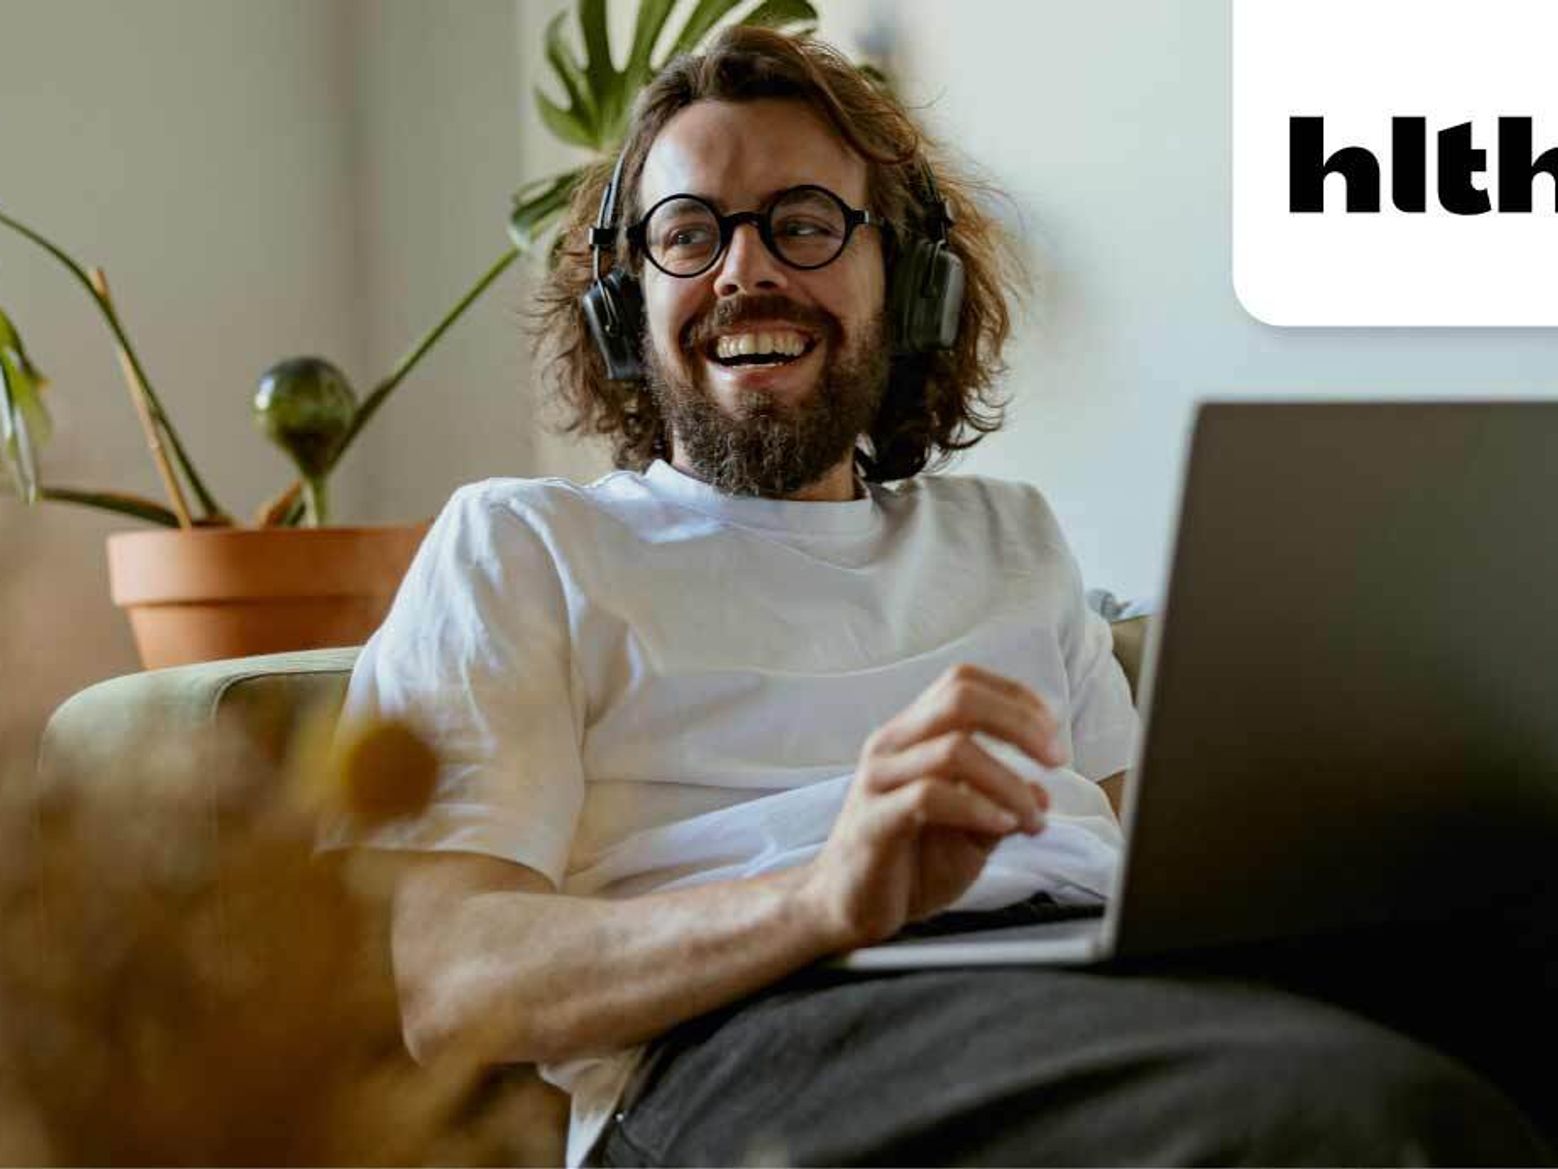 Adult male sitting on a couch with on a laptop. HTLH conference logo displayed next to him.